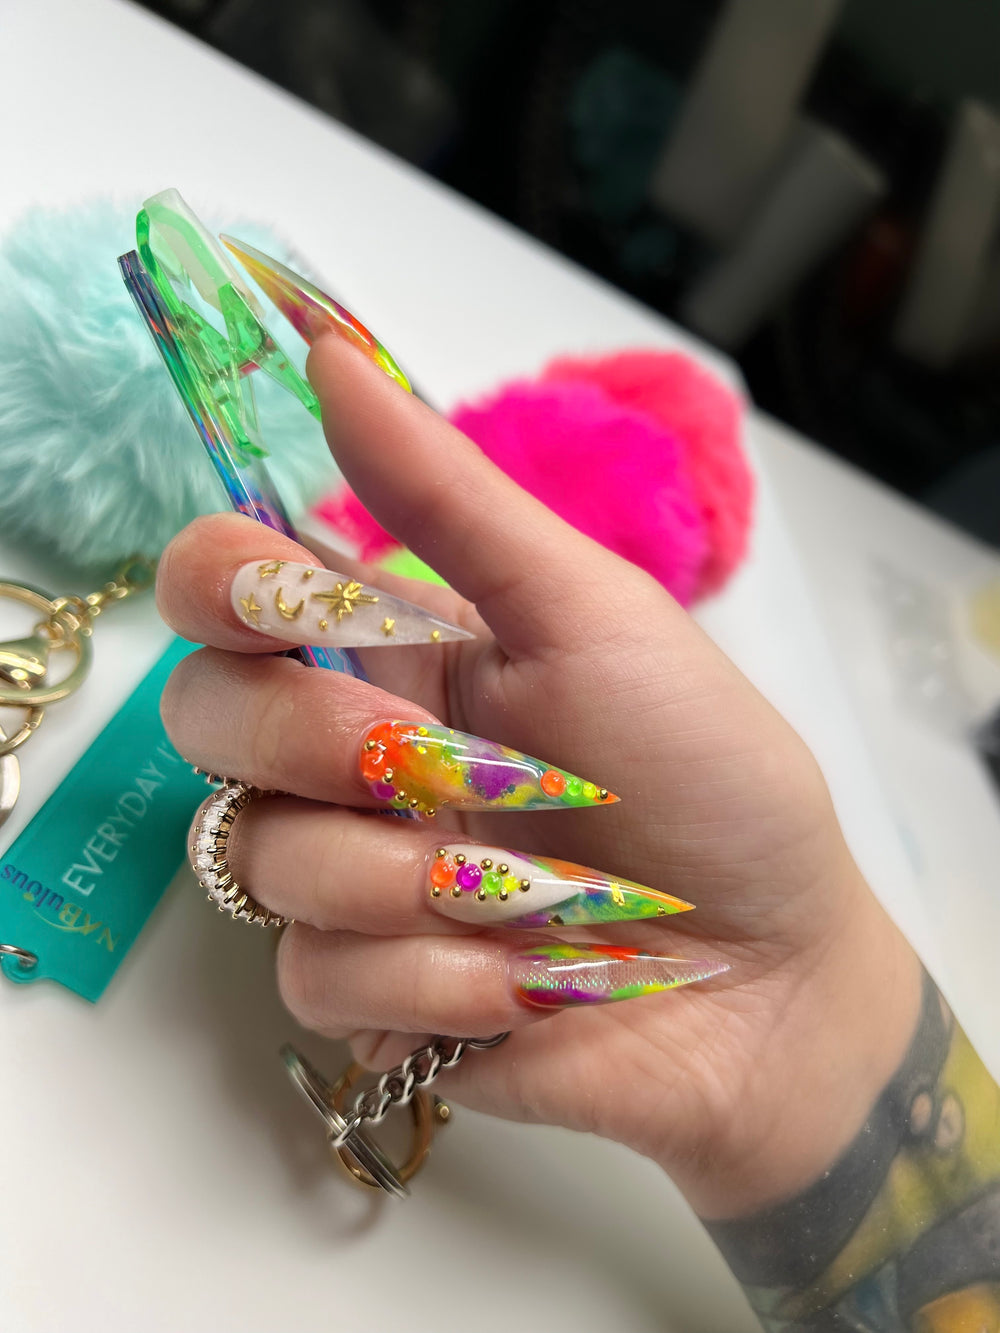 SZ-LY Card Grabber for Long Nails, Keychain with Pom Pom Ball and Plastic  Clip, Credit Card Puller for Long Nails Easy to Grab Your Card at The ​Gas